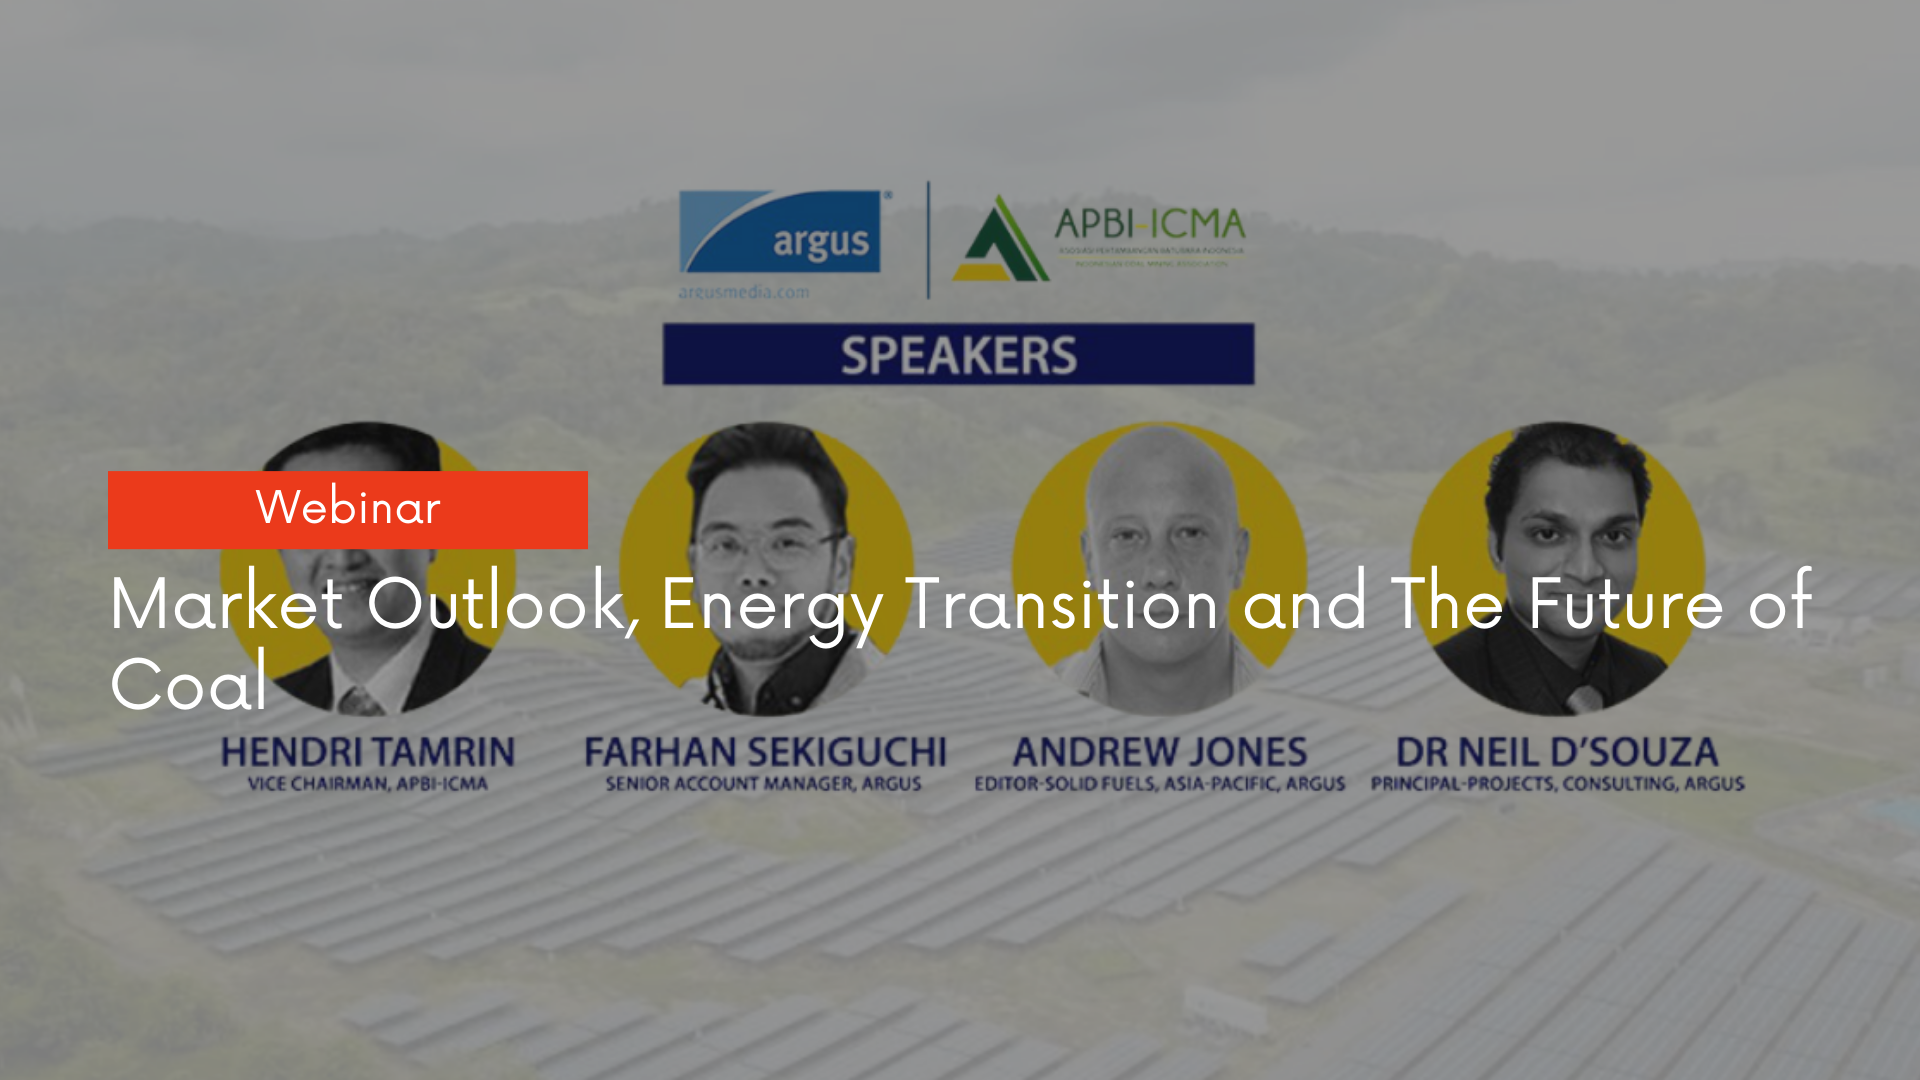 APBI-ICMA and Argus Webinar: Market Outlook, Energy Transition, and the Future of Coal